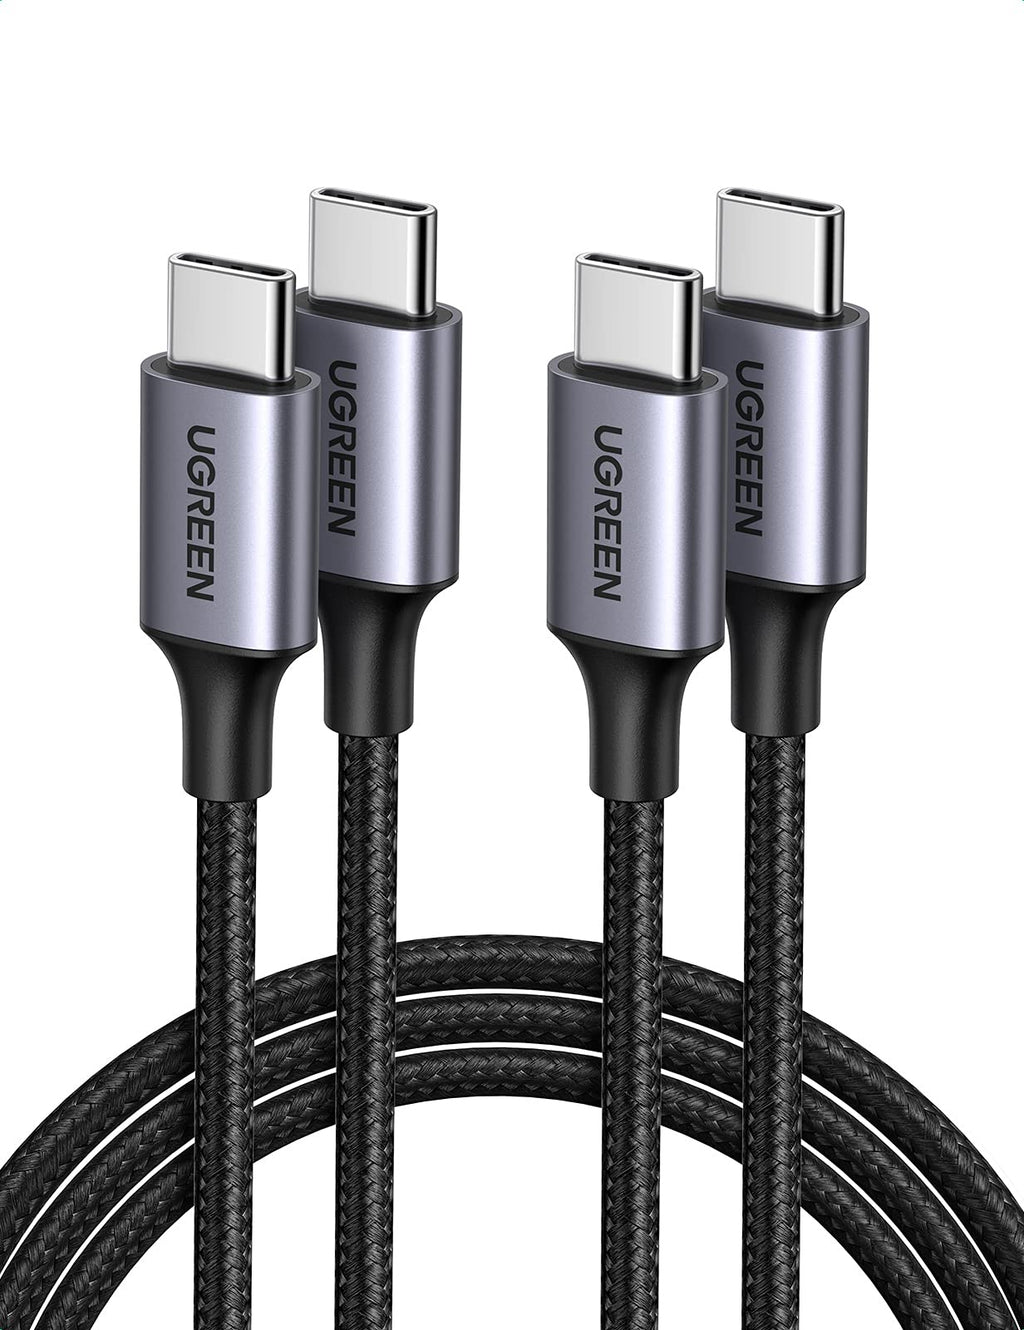  [AUSTRALIA] - UGREEN USB C to USB C Cable, 2 Pack 60W Type C PD Fast Charging Cord 6ft Compatible with Samsung Galaxy S21 S20 S10 S9 Note 20 10 Google Pixel 4 3 2 XL MacBook Air 13" iPad Pro 2020 Nintendo Switch